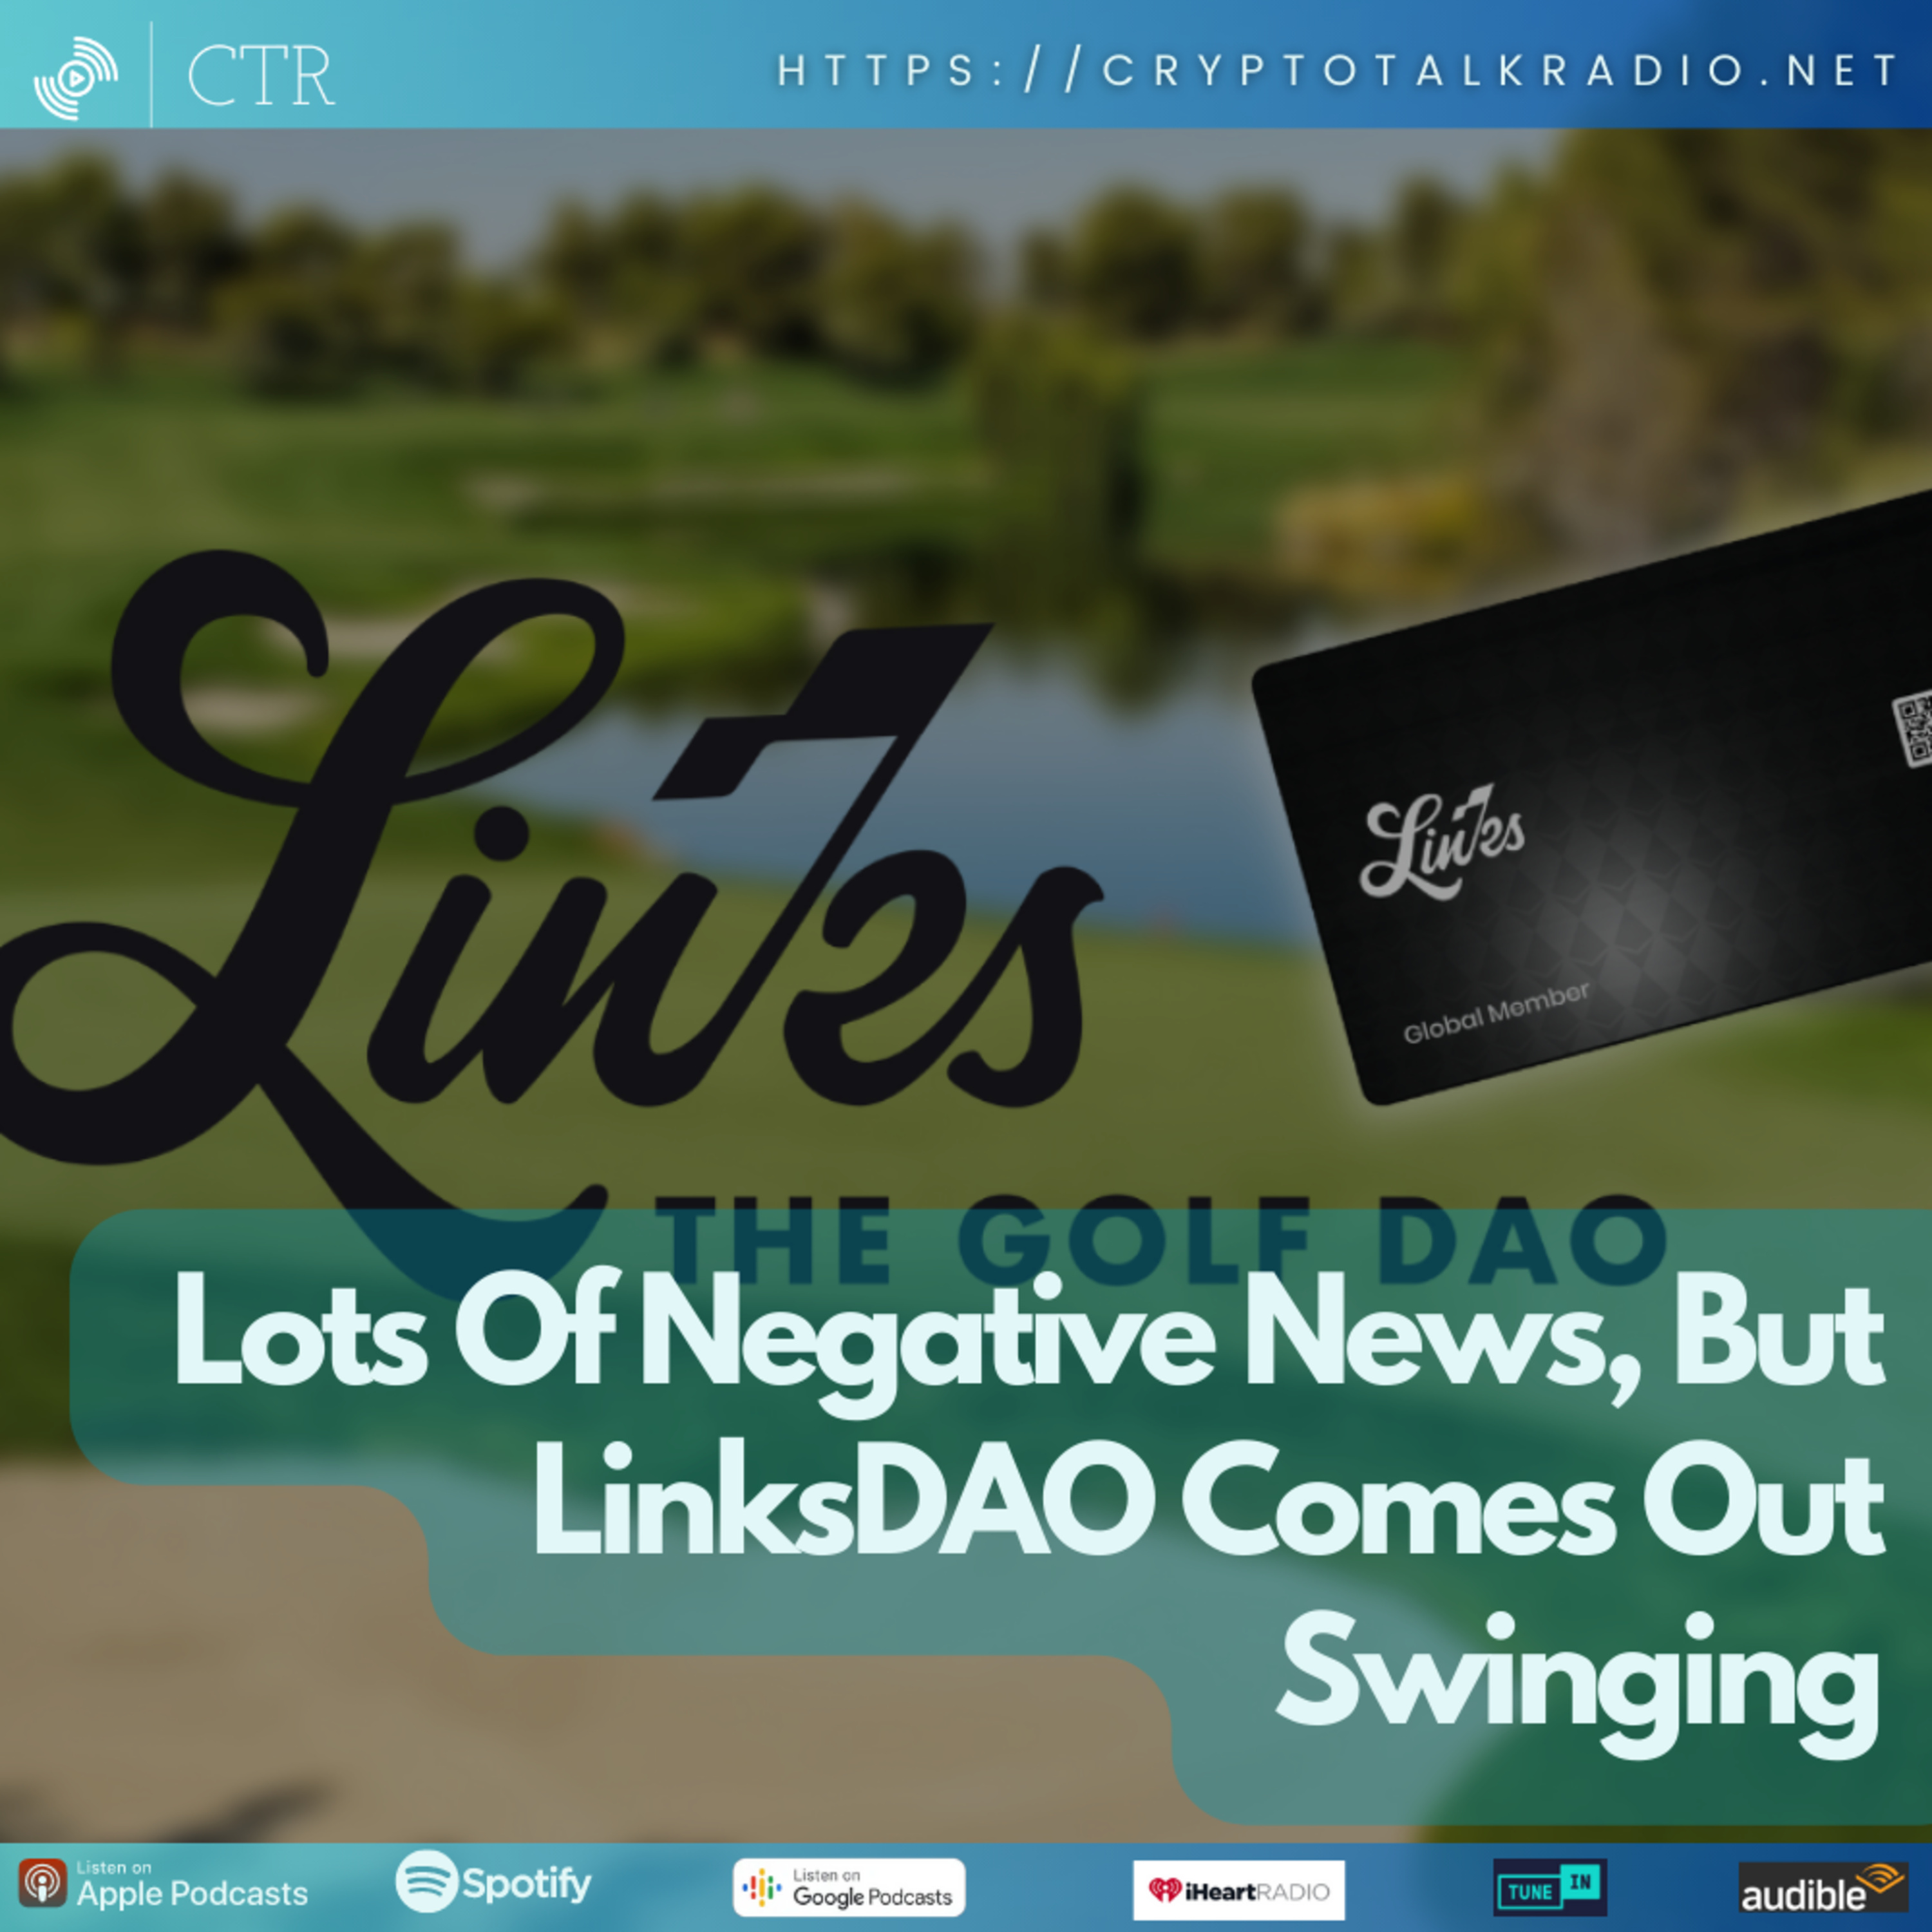 Lots Of Negative News, But #LinksDAO Comes Out Swinging